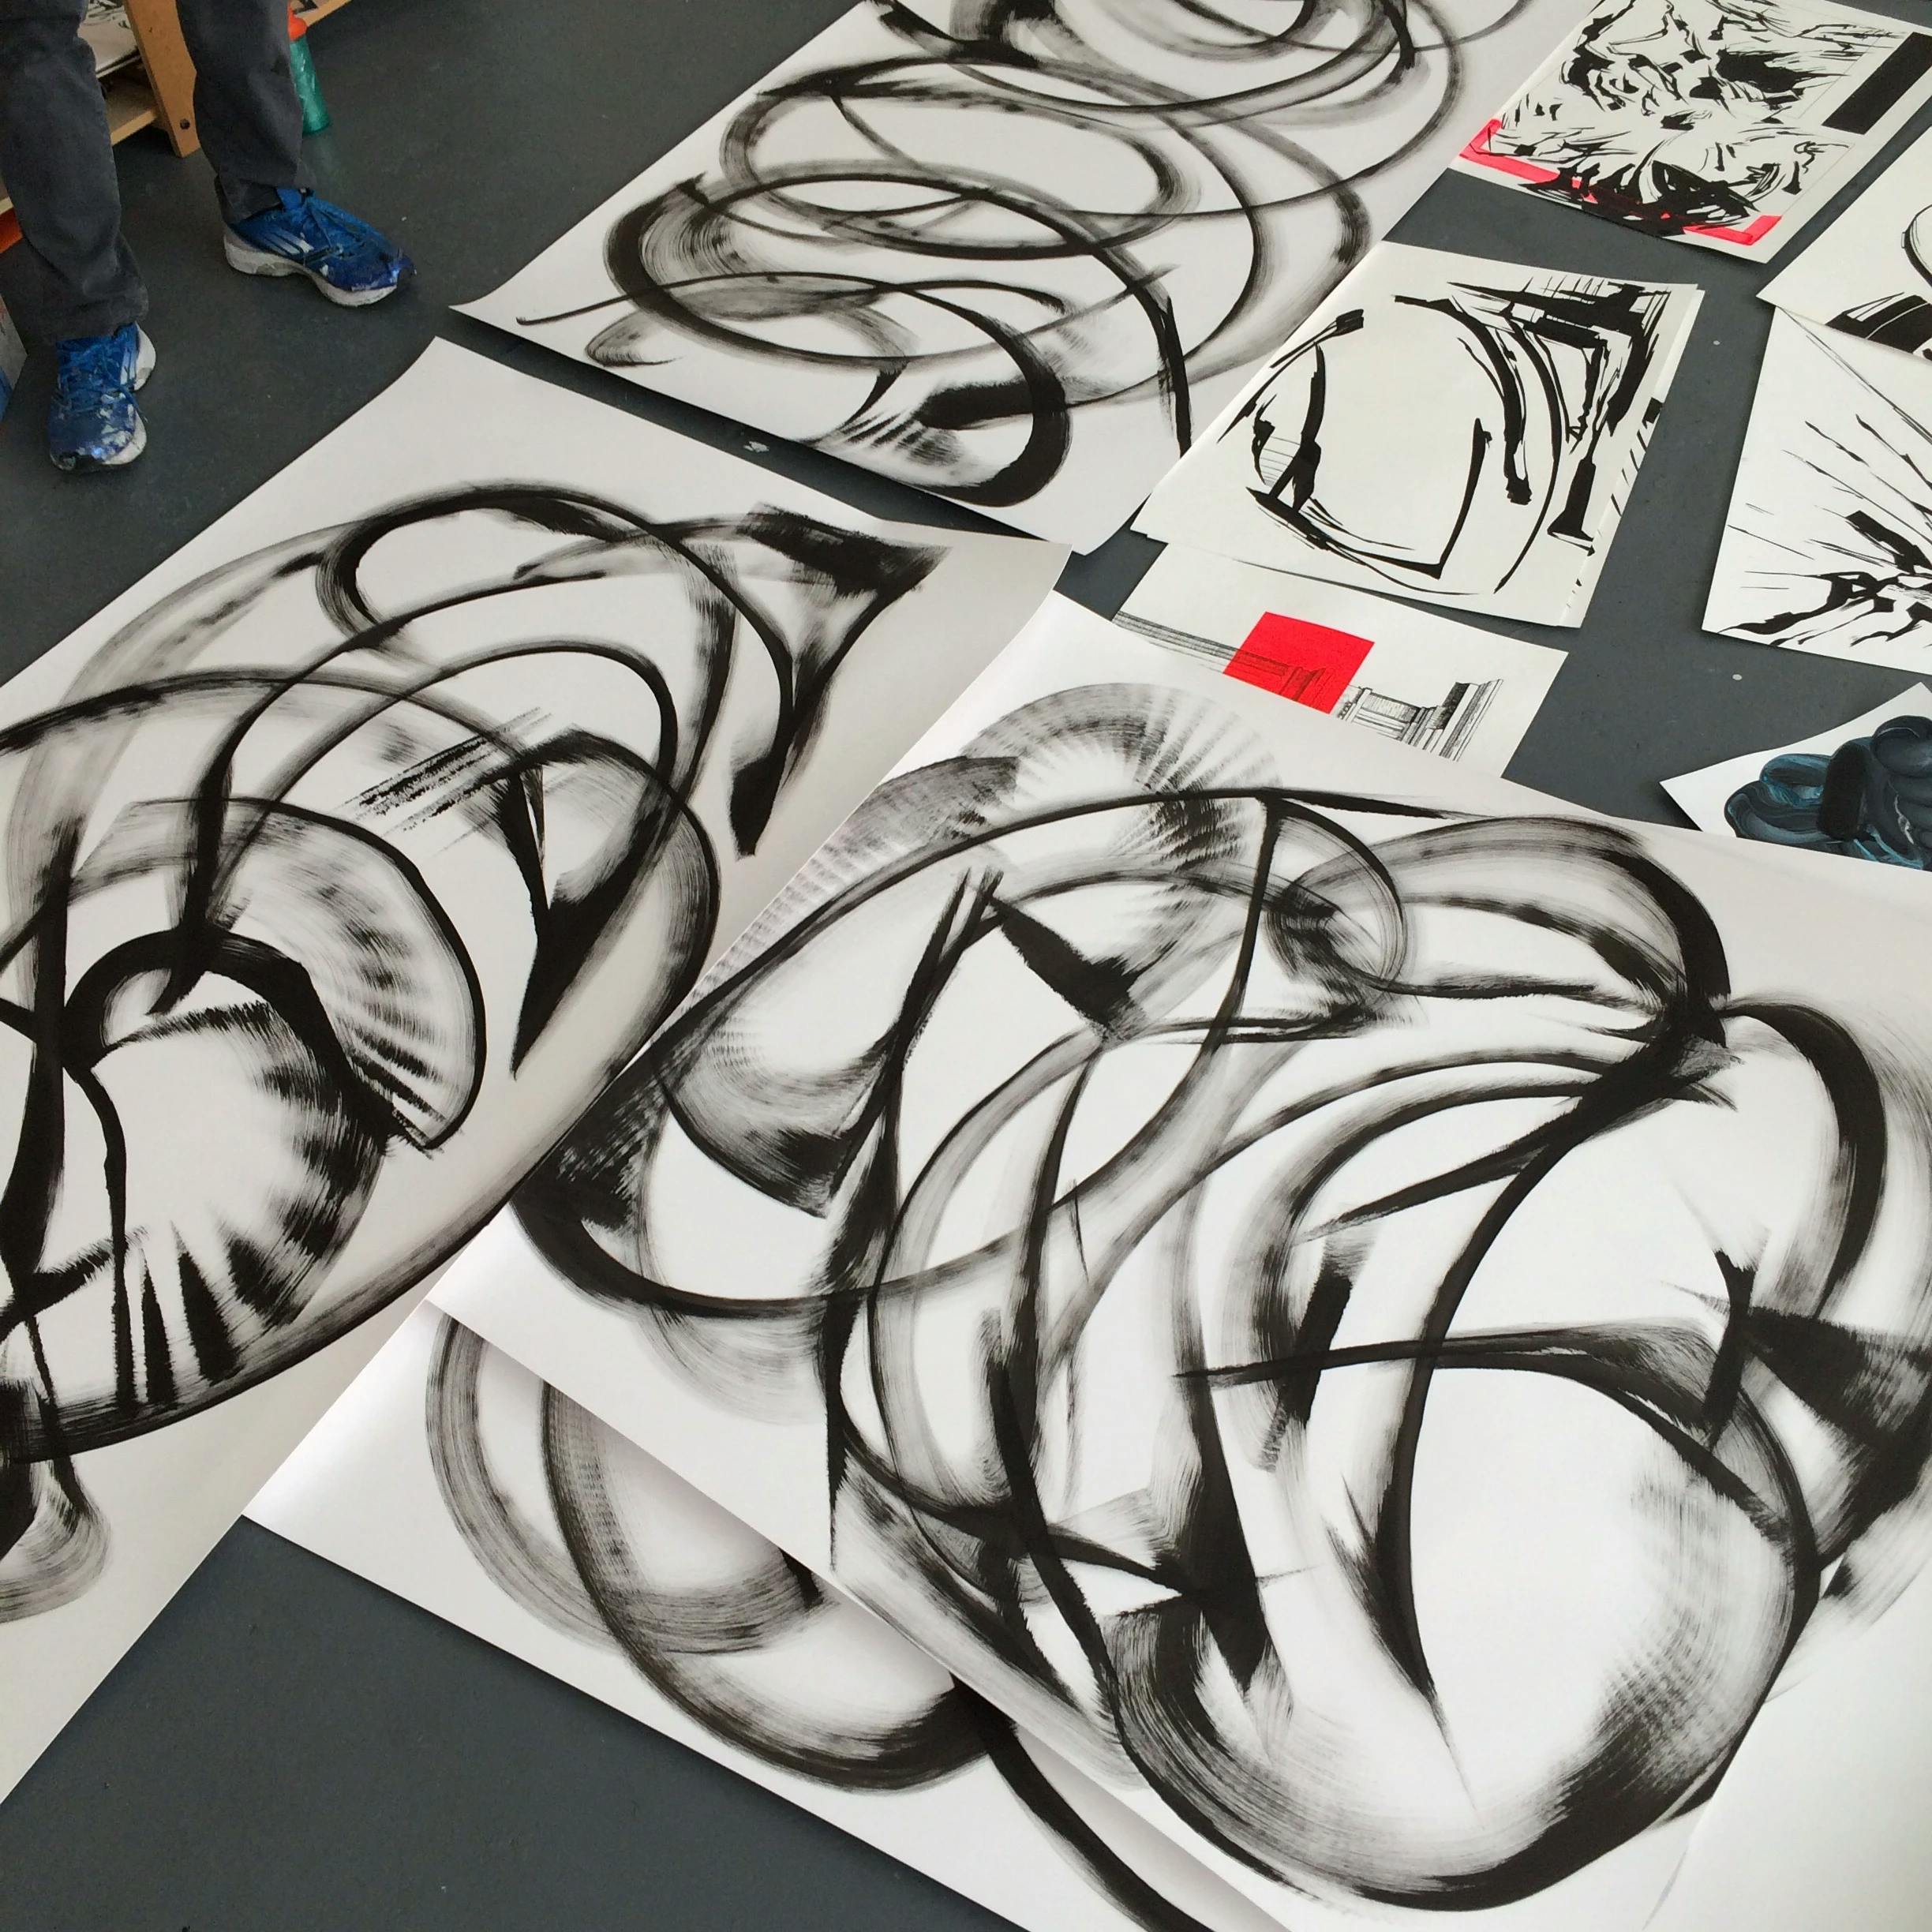 Stacks of circular swaths of black and white ink on paper by artist Thomas Hammer.